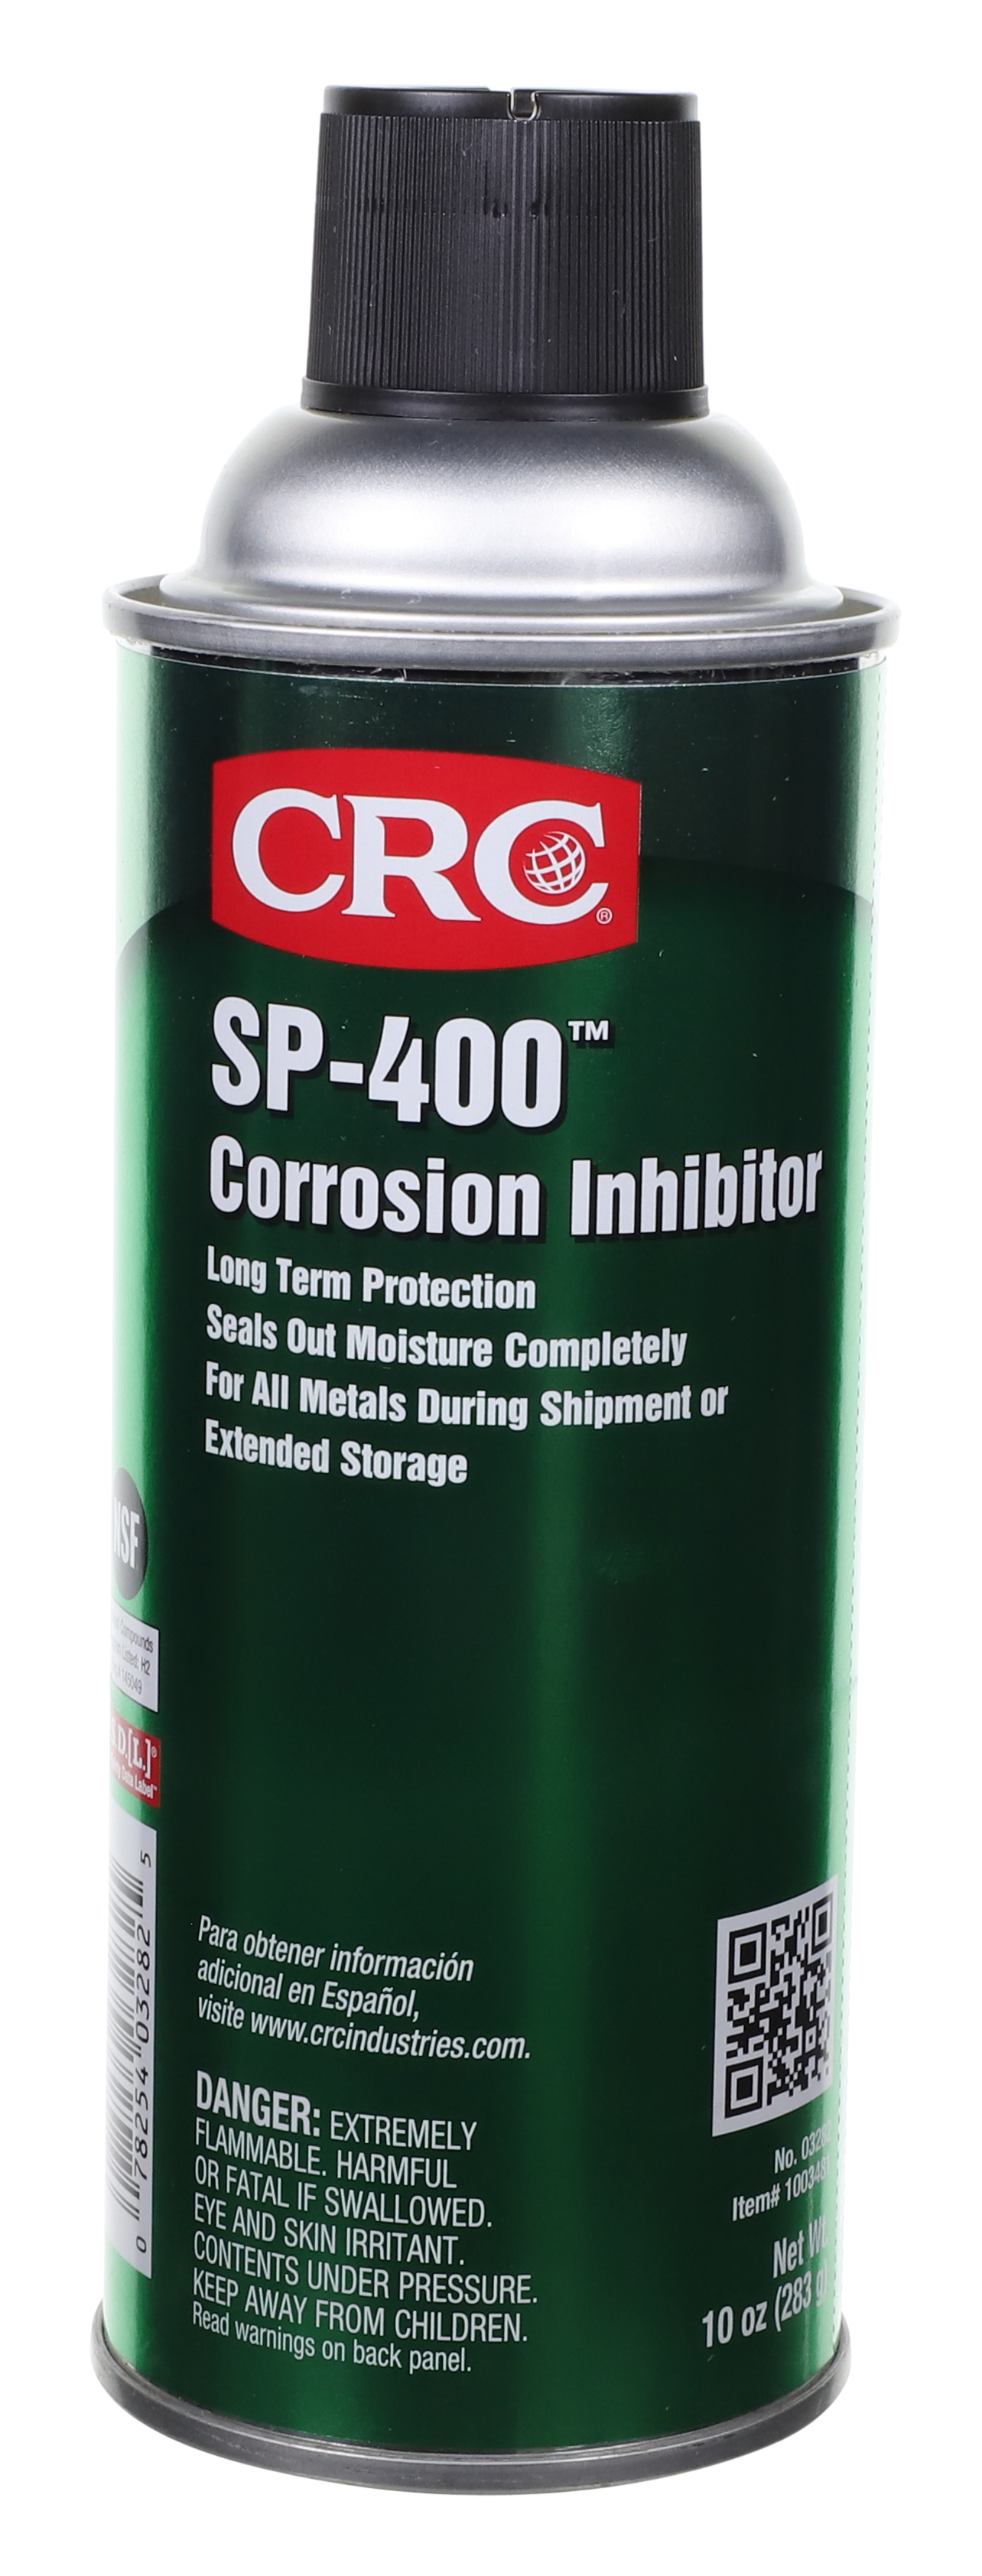 CRC3 SP400 CORROSION INHIBITOR 11OZ - Lubricants and Oils